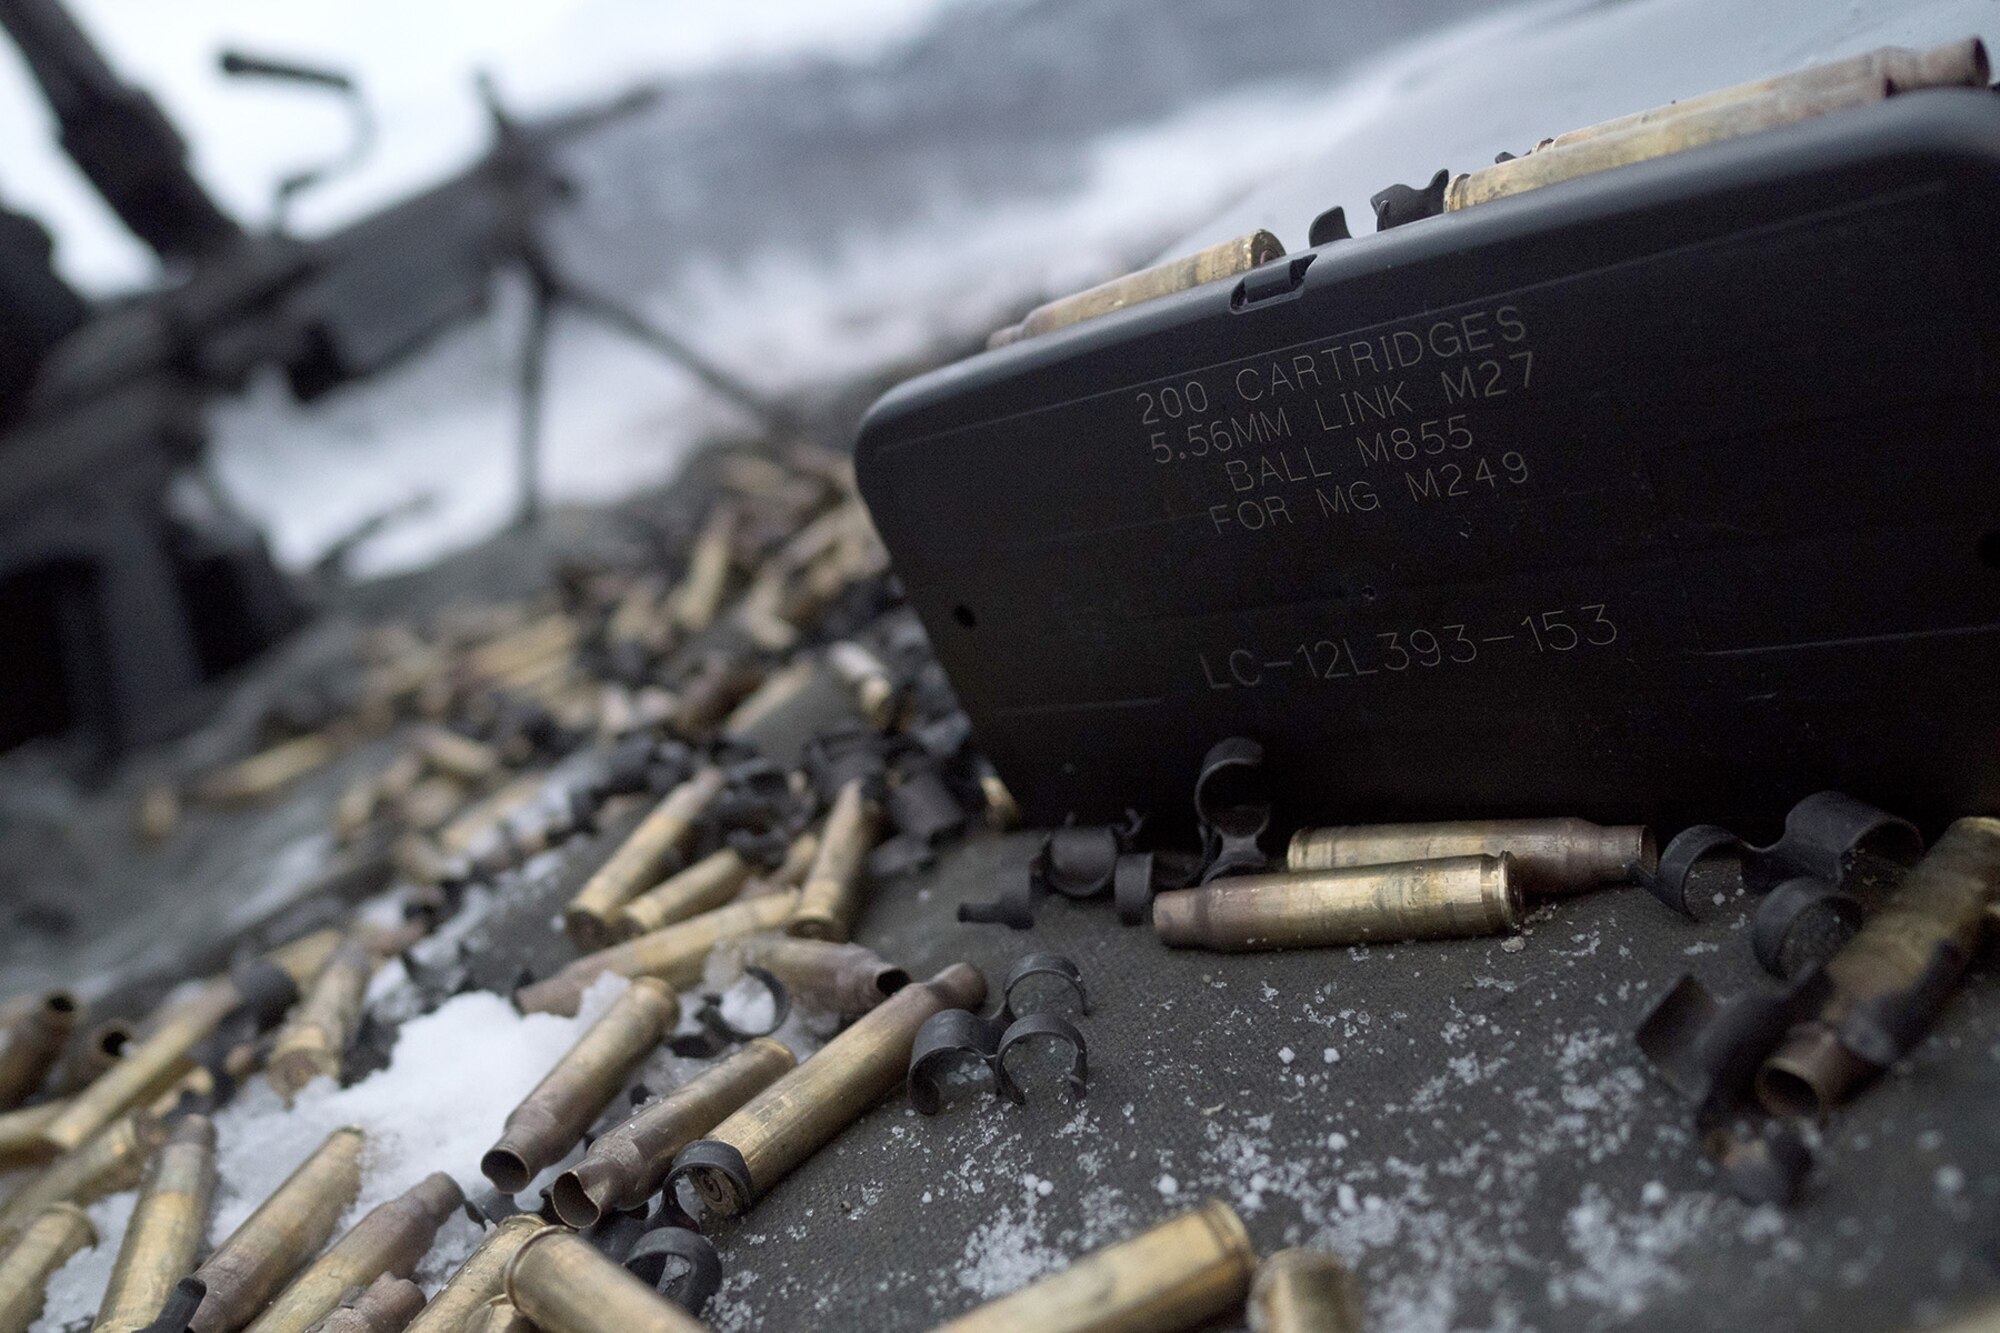 Expended 5.56mm casings cover the ground as Airmen assigned to the 673d Security Forces Squadron conduct an M249 Squad Automatic Weapon, and M2 .50 Caliber machine gun qualification range on Joint Base Elmendorf-Richardson, Alaska, Jan. 10, 2018. Security Forces Airmen perform extensive training in law enforcement as well as combat tactics to protect U.S. Military bases and assets both stateside and overseas.